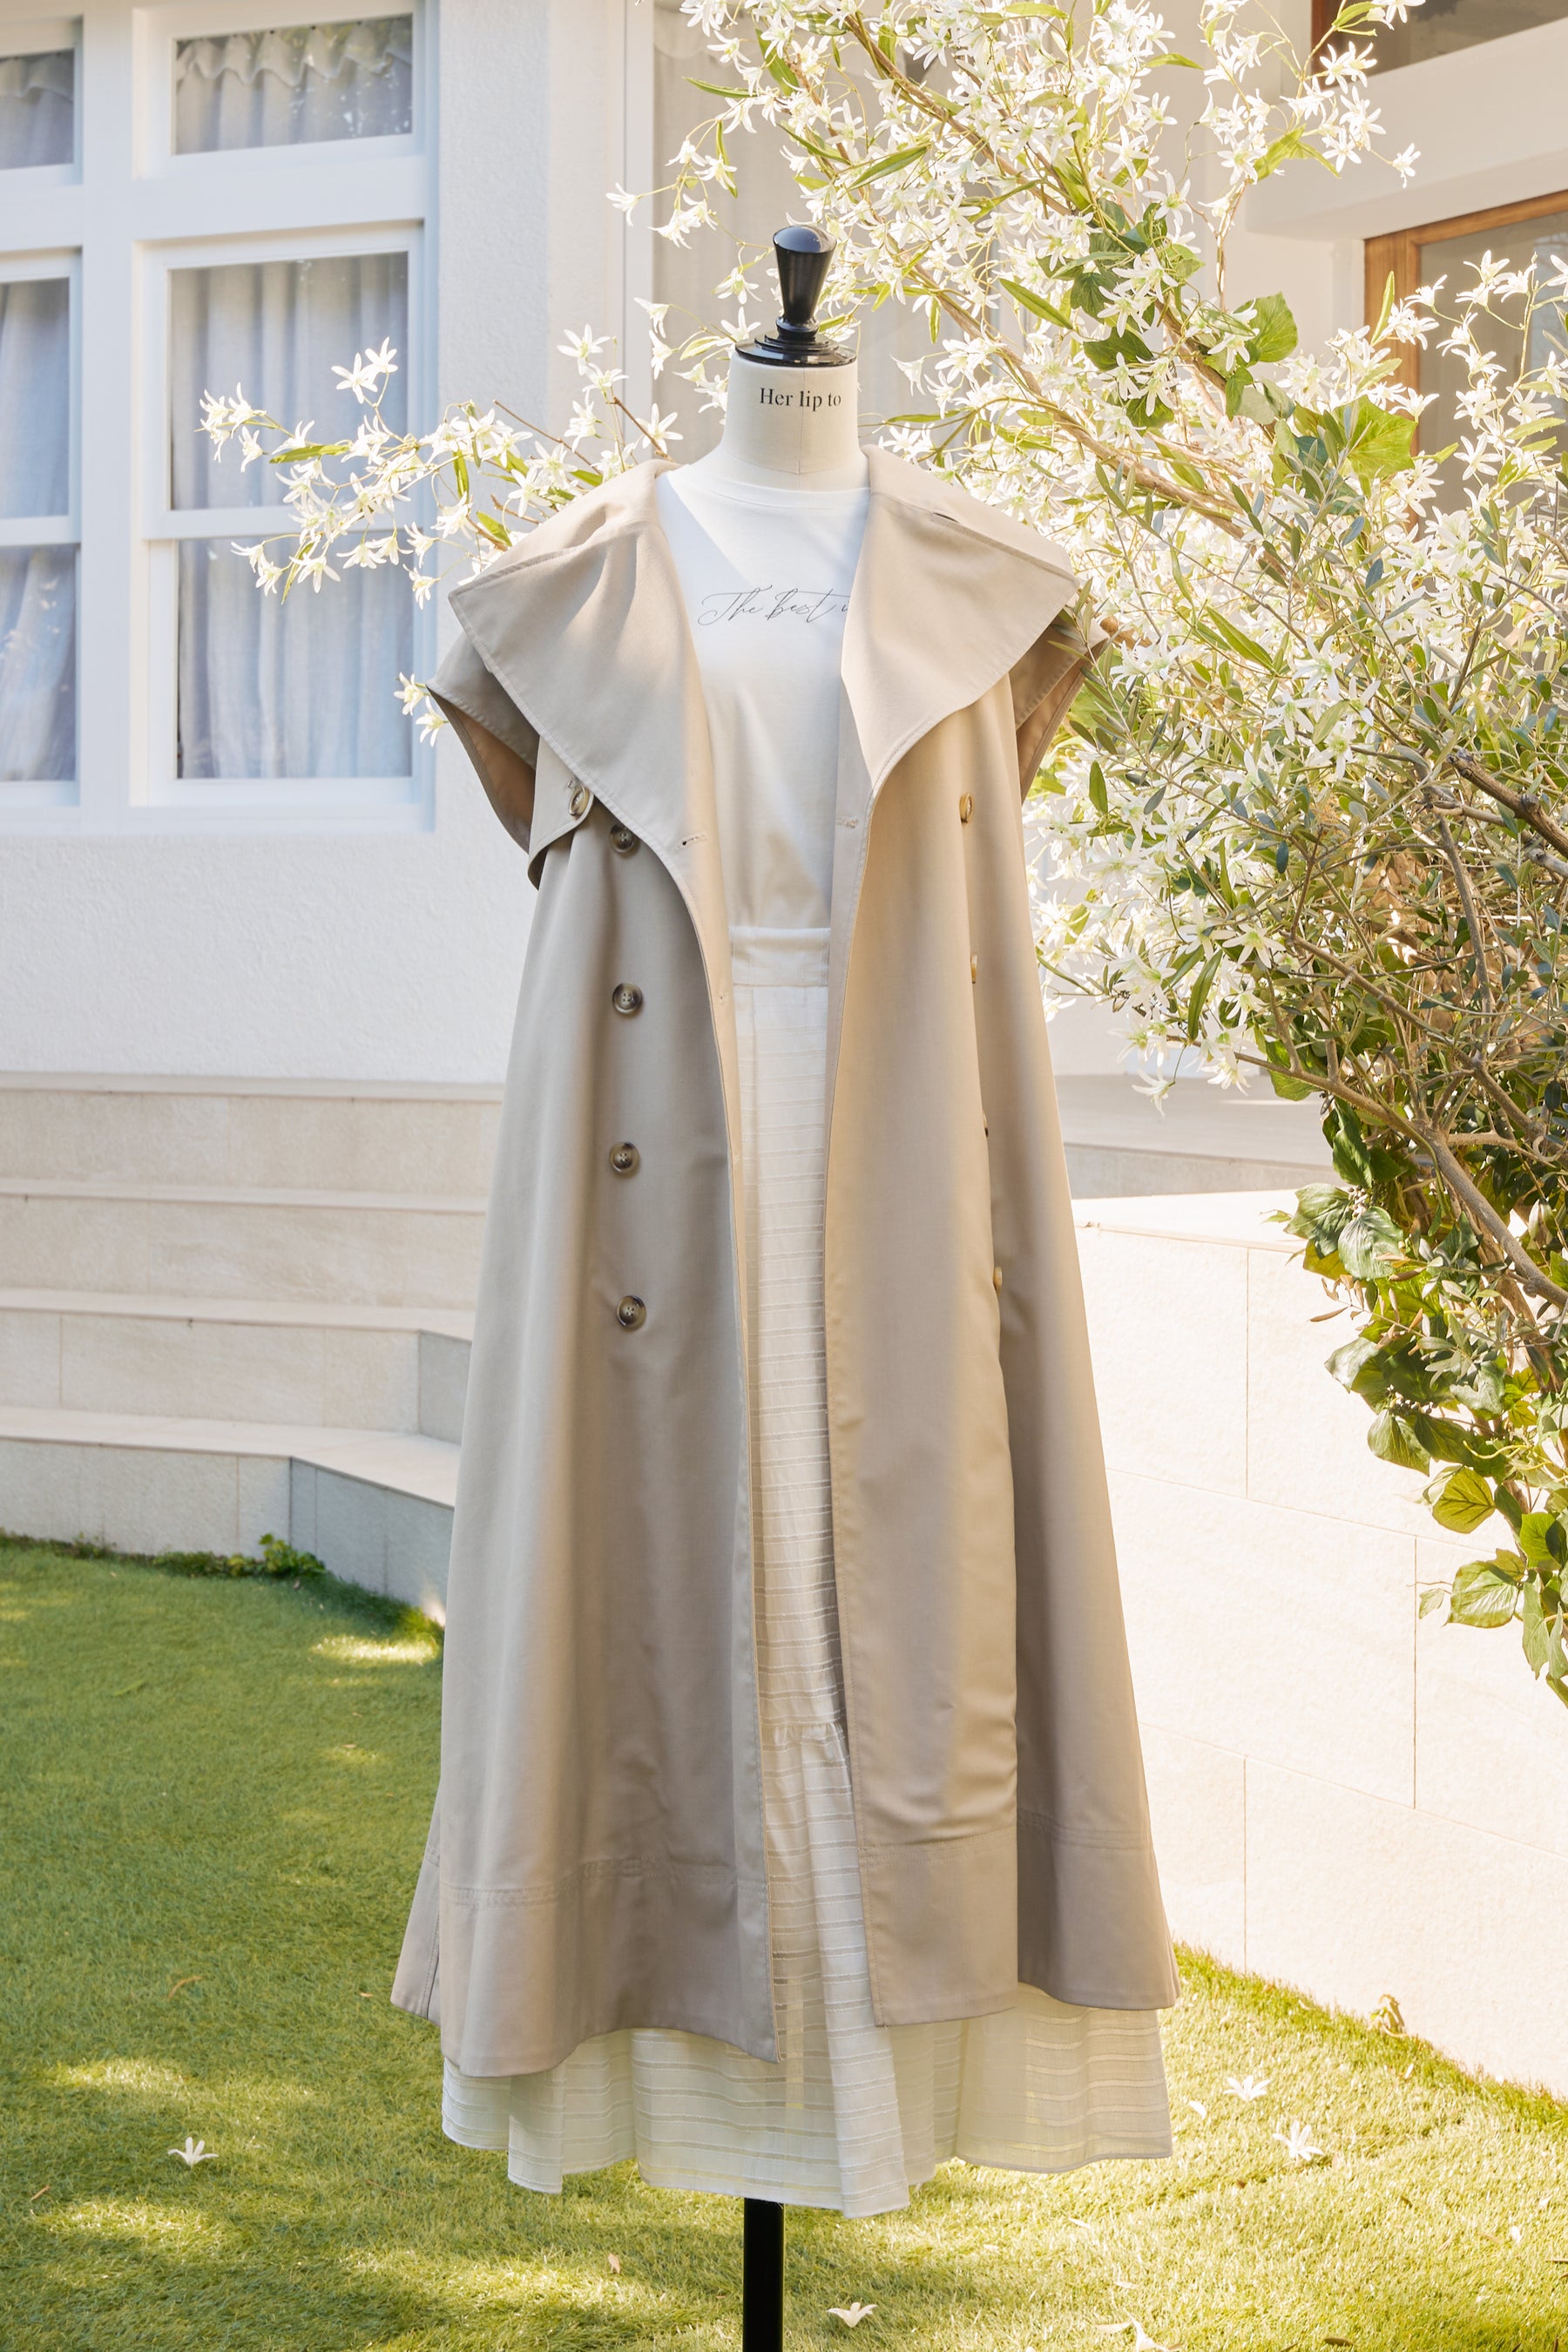 [Posting ended] Sleeveless Twill Trench Dress